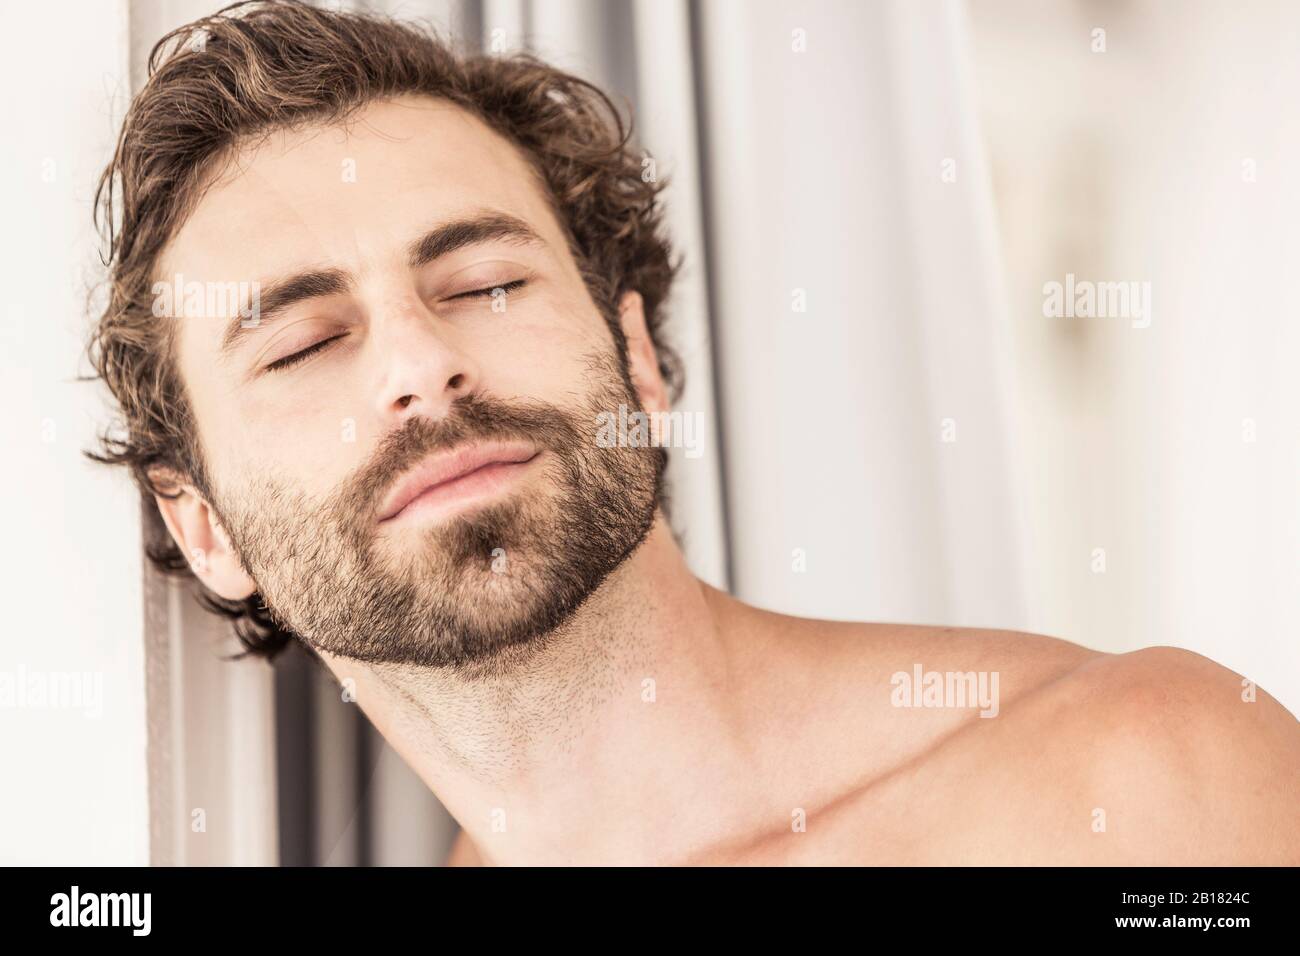 Portrait of young man with beard, closed eyes Stock Photo